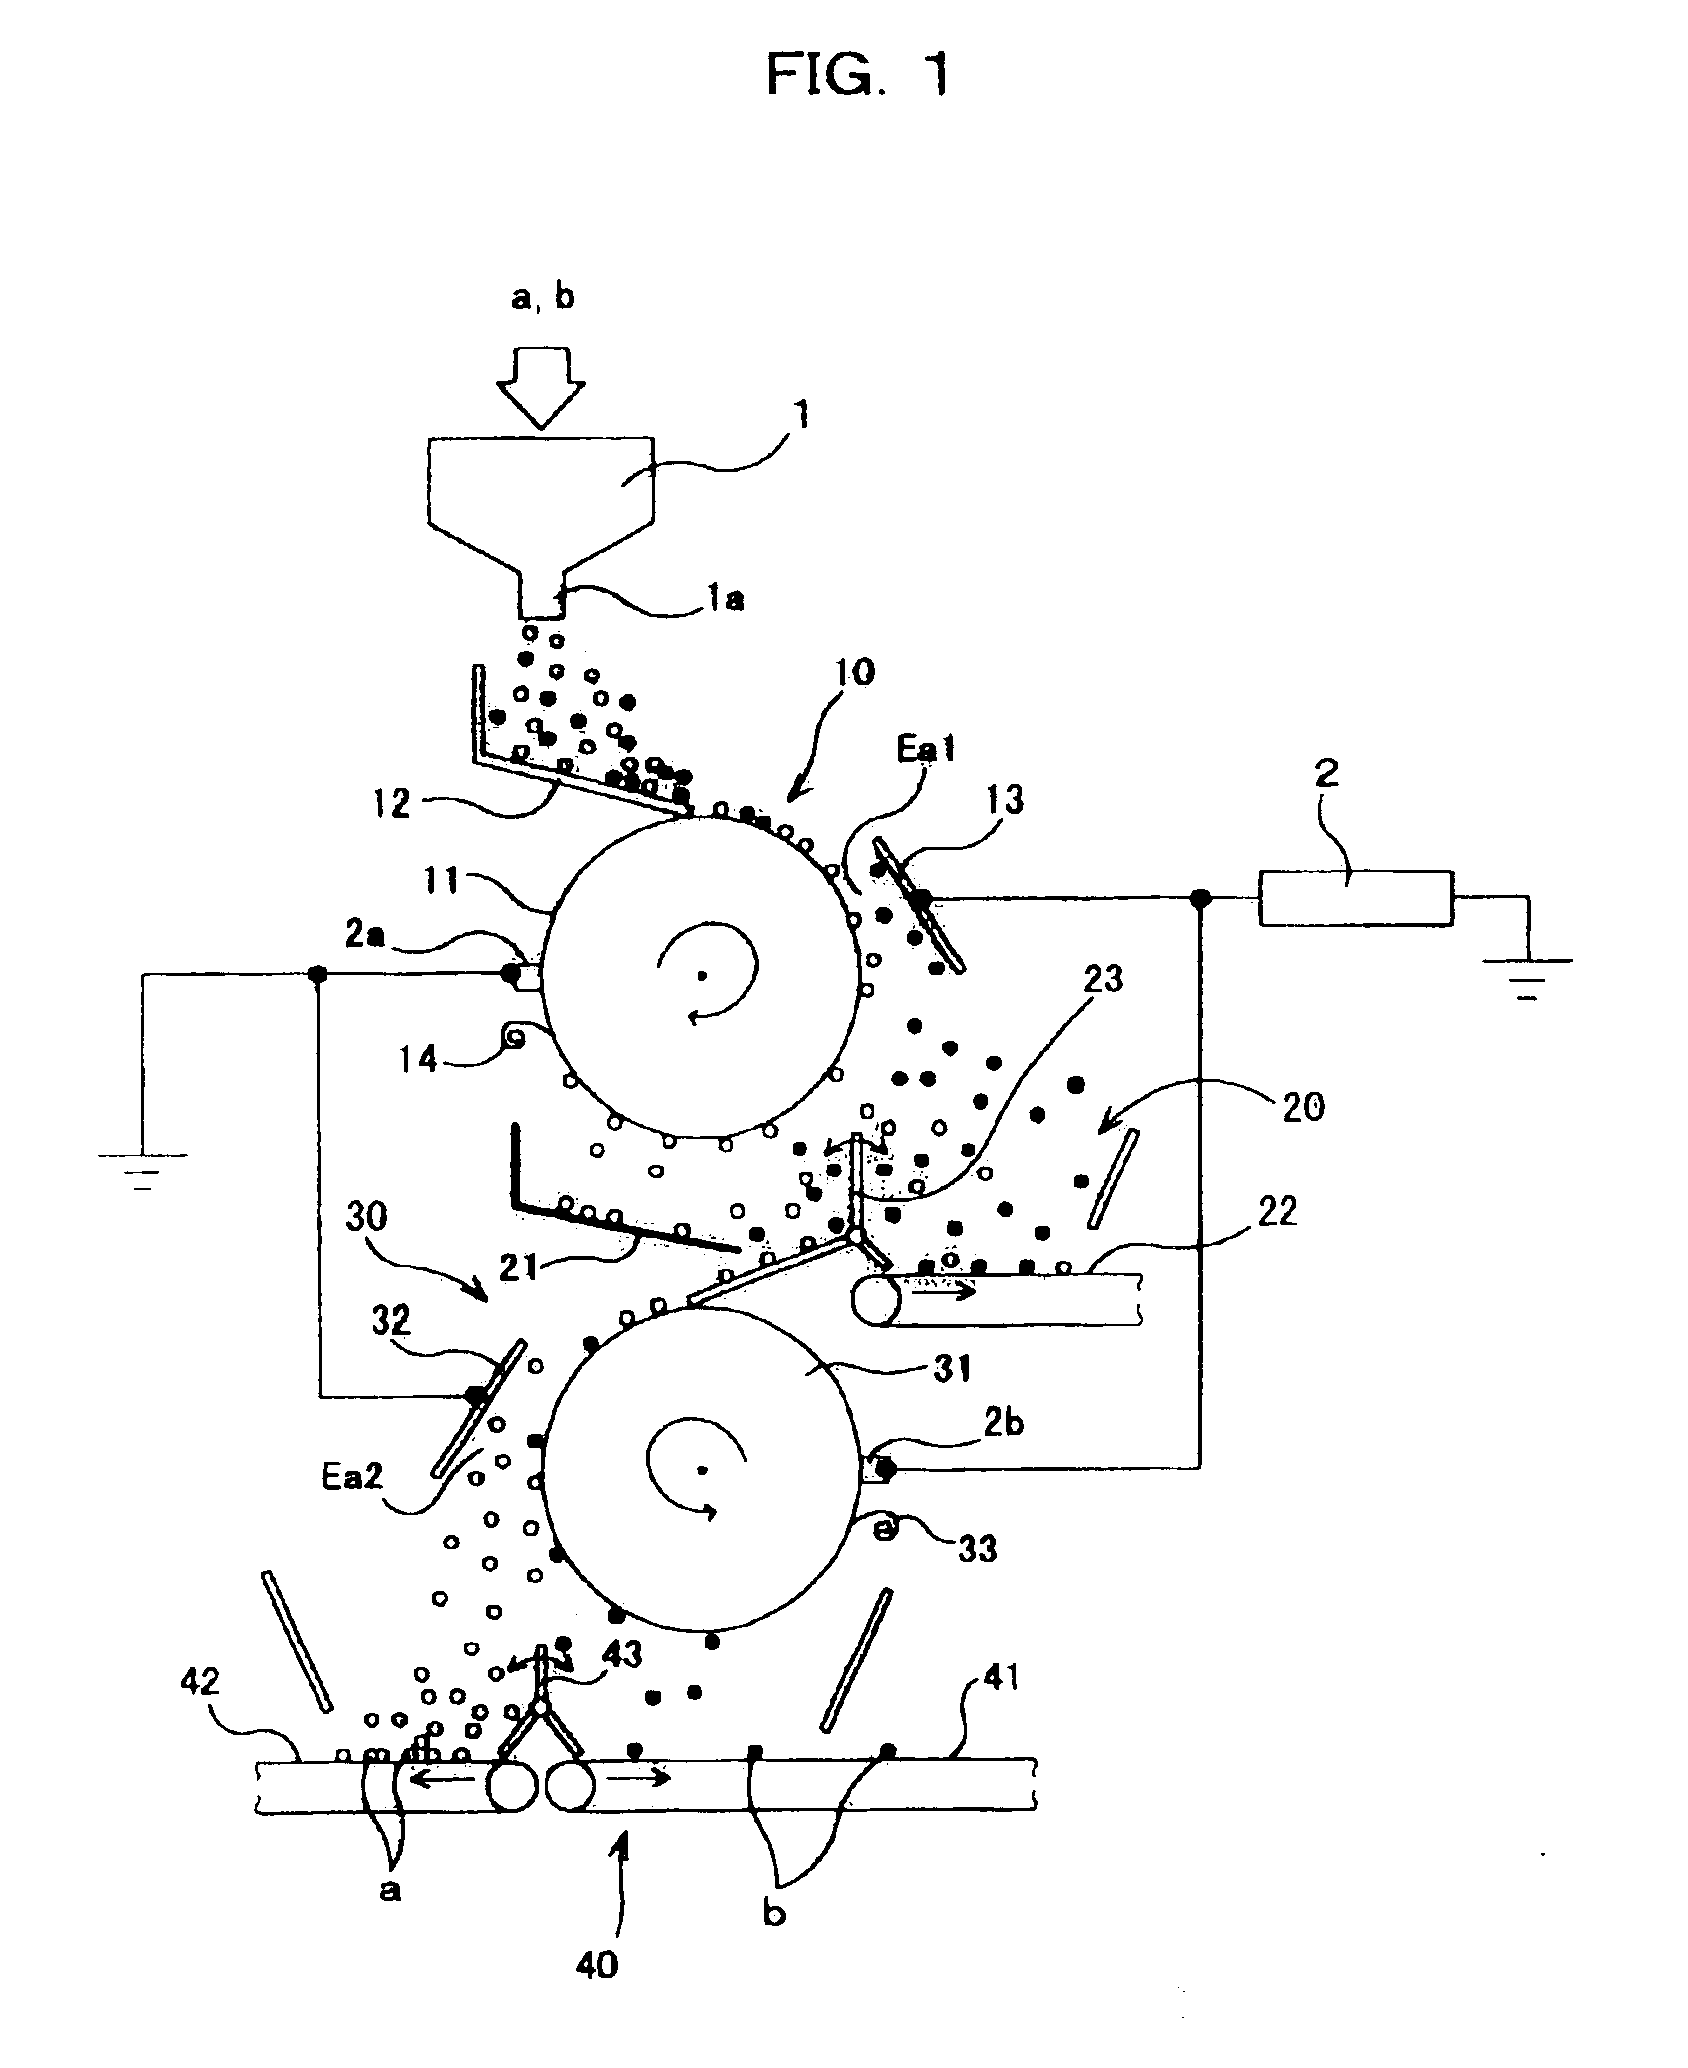 Apparatus for separating plastic chips